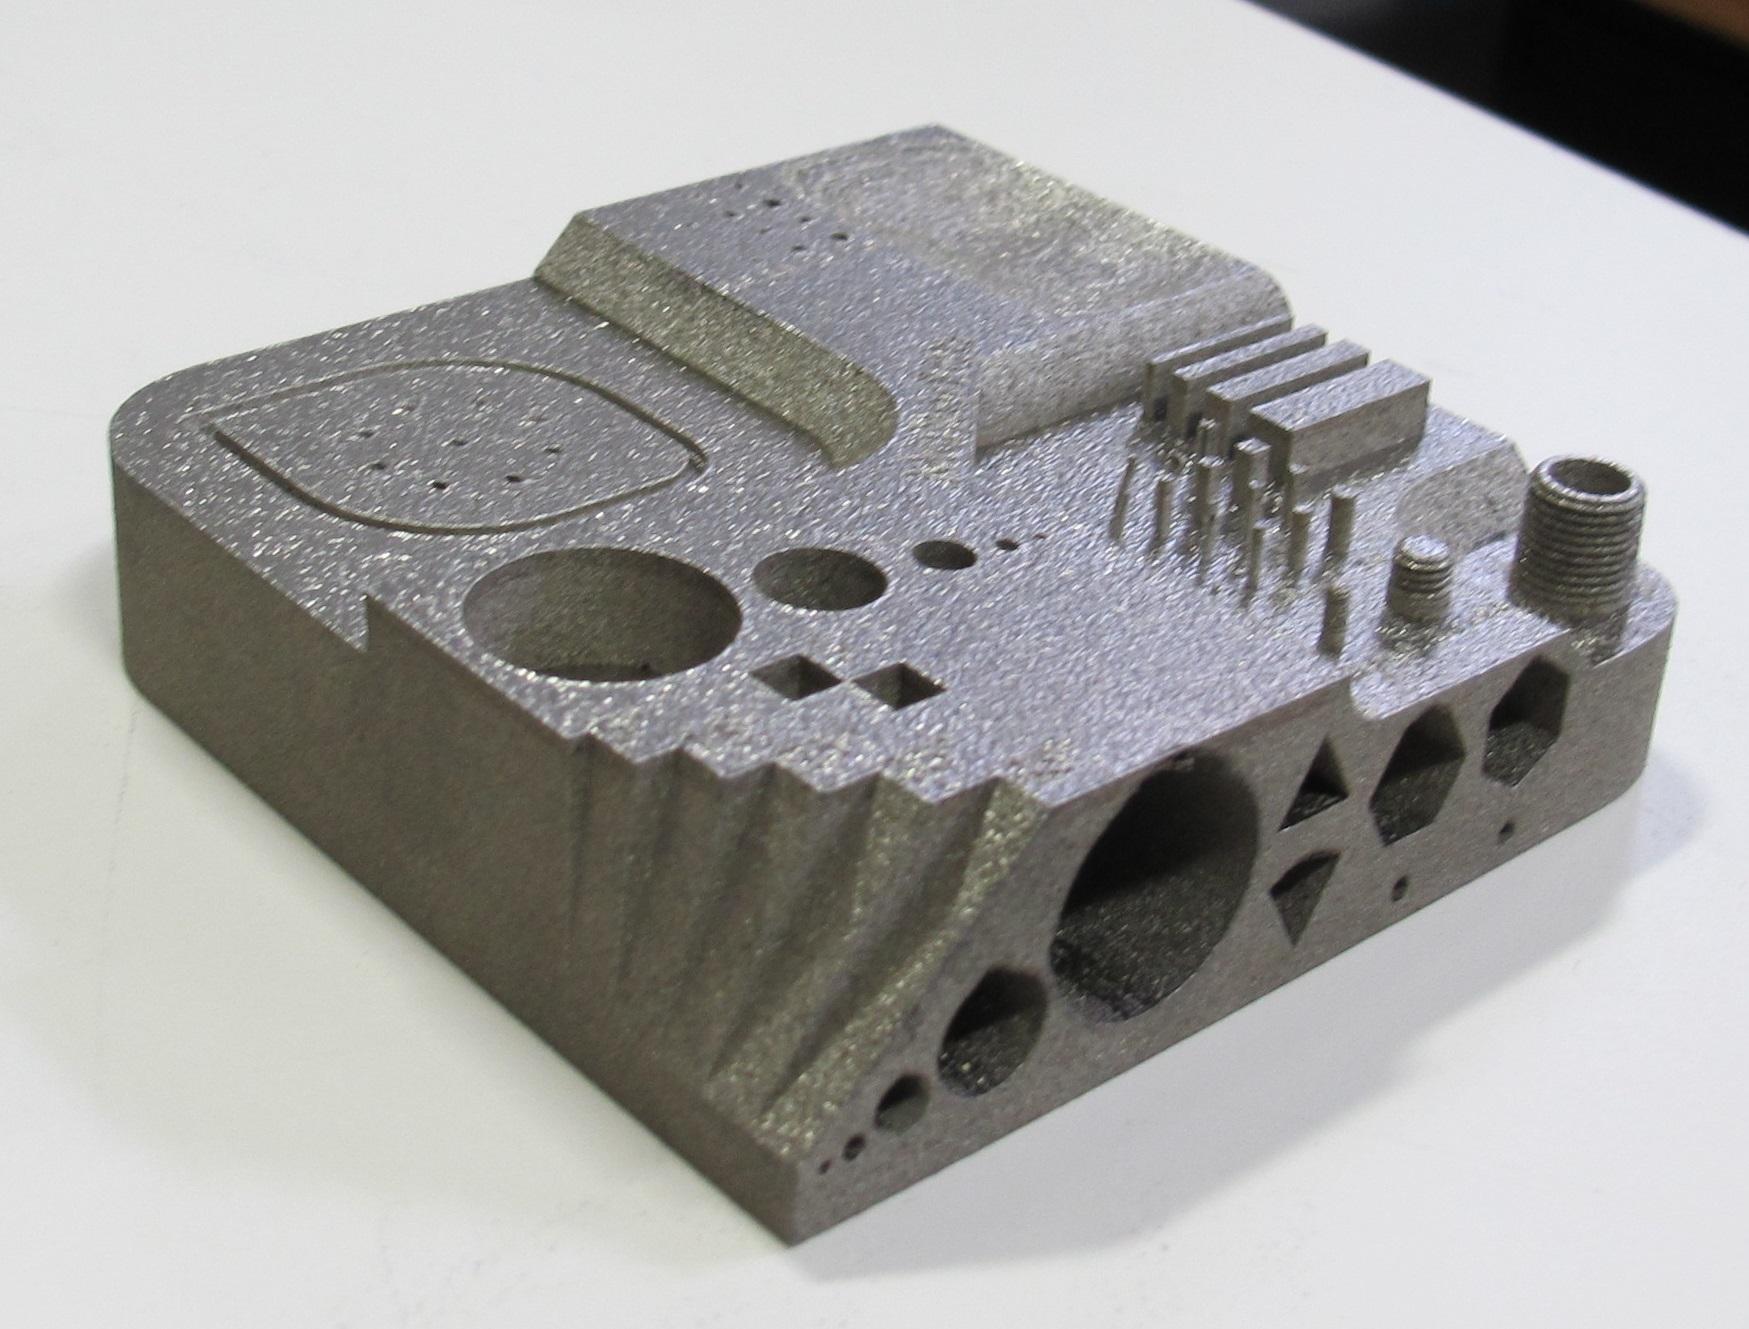 Tien jaar . speel piano MatterFab Reveals Their Affordable Metal 3D Printer, 'An Order of Magnitude  Cheaper' - 3DPrint.com | The Voice of 3D Printing / Additive Manufacturing